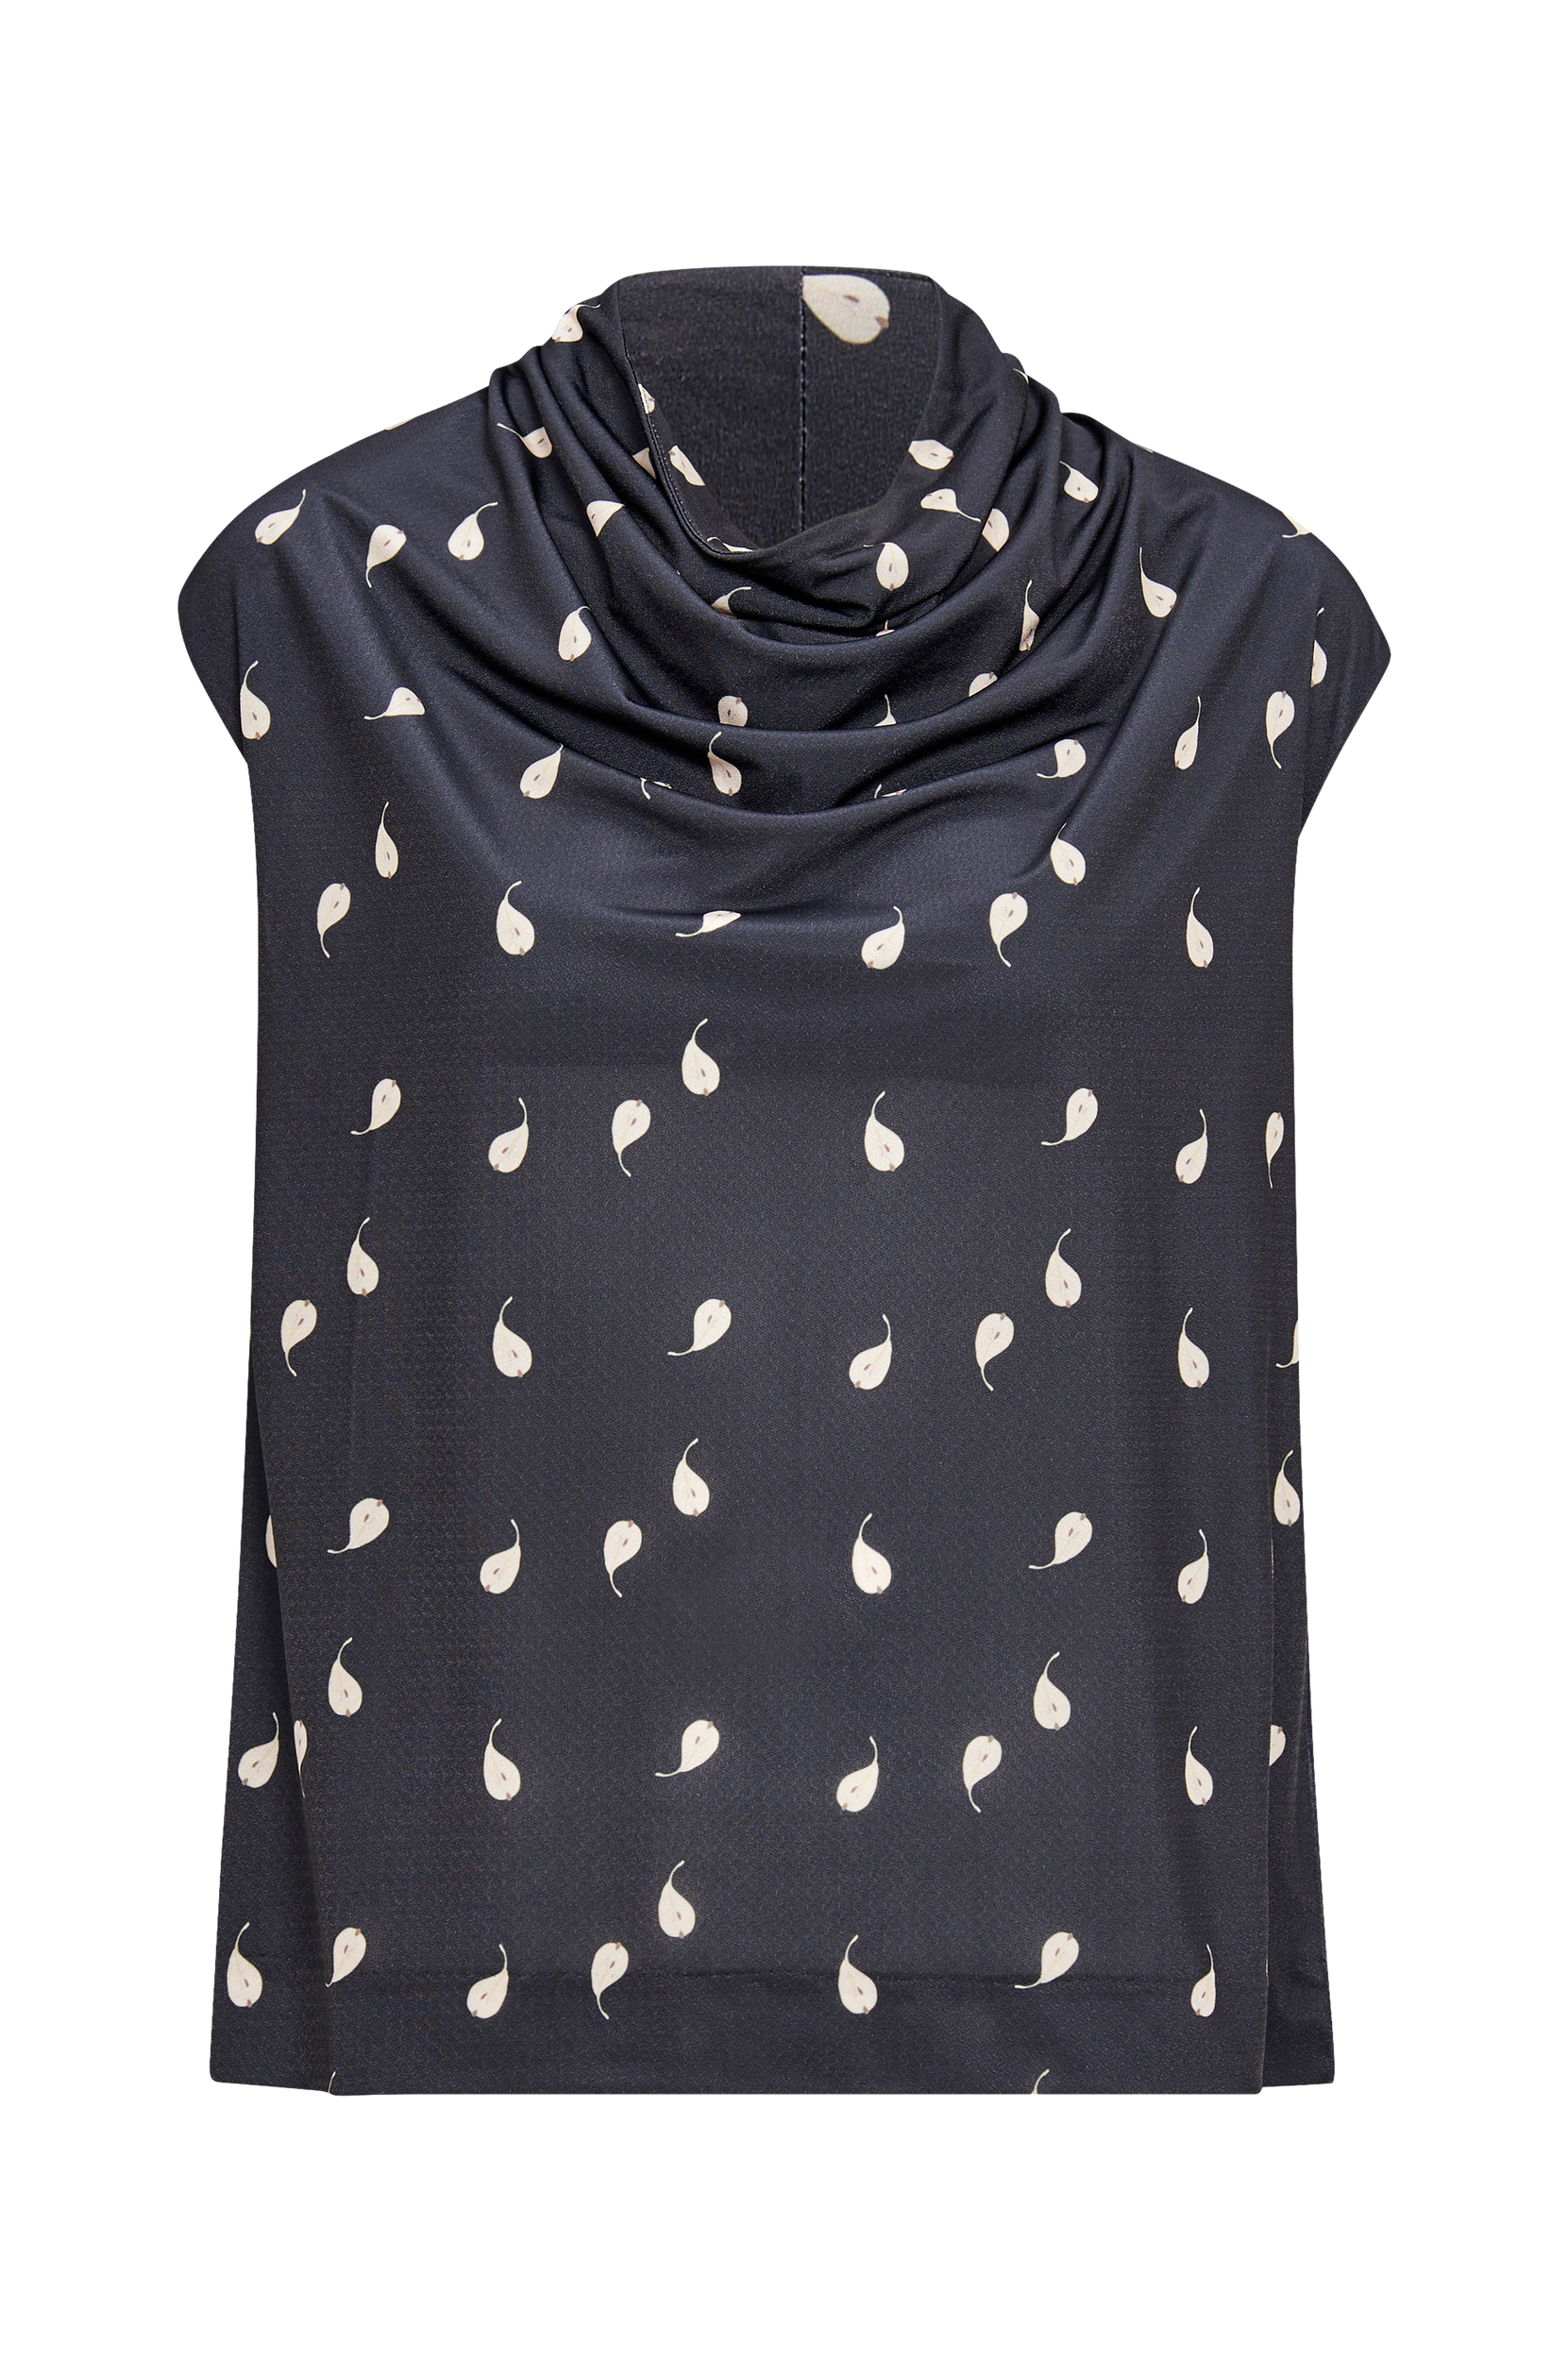 Pusero Moina Graphic Pear Top, Whyred